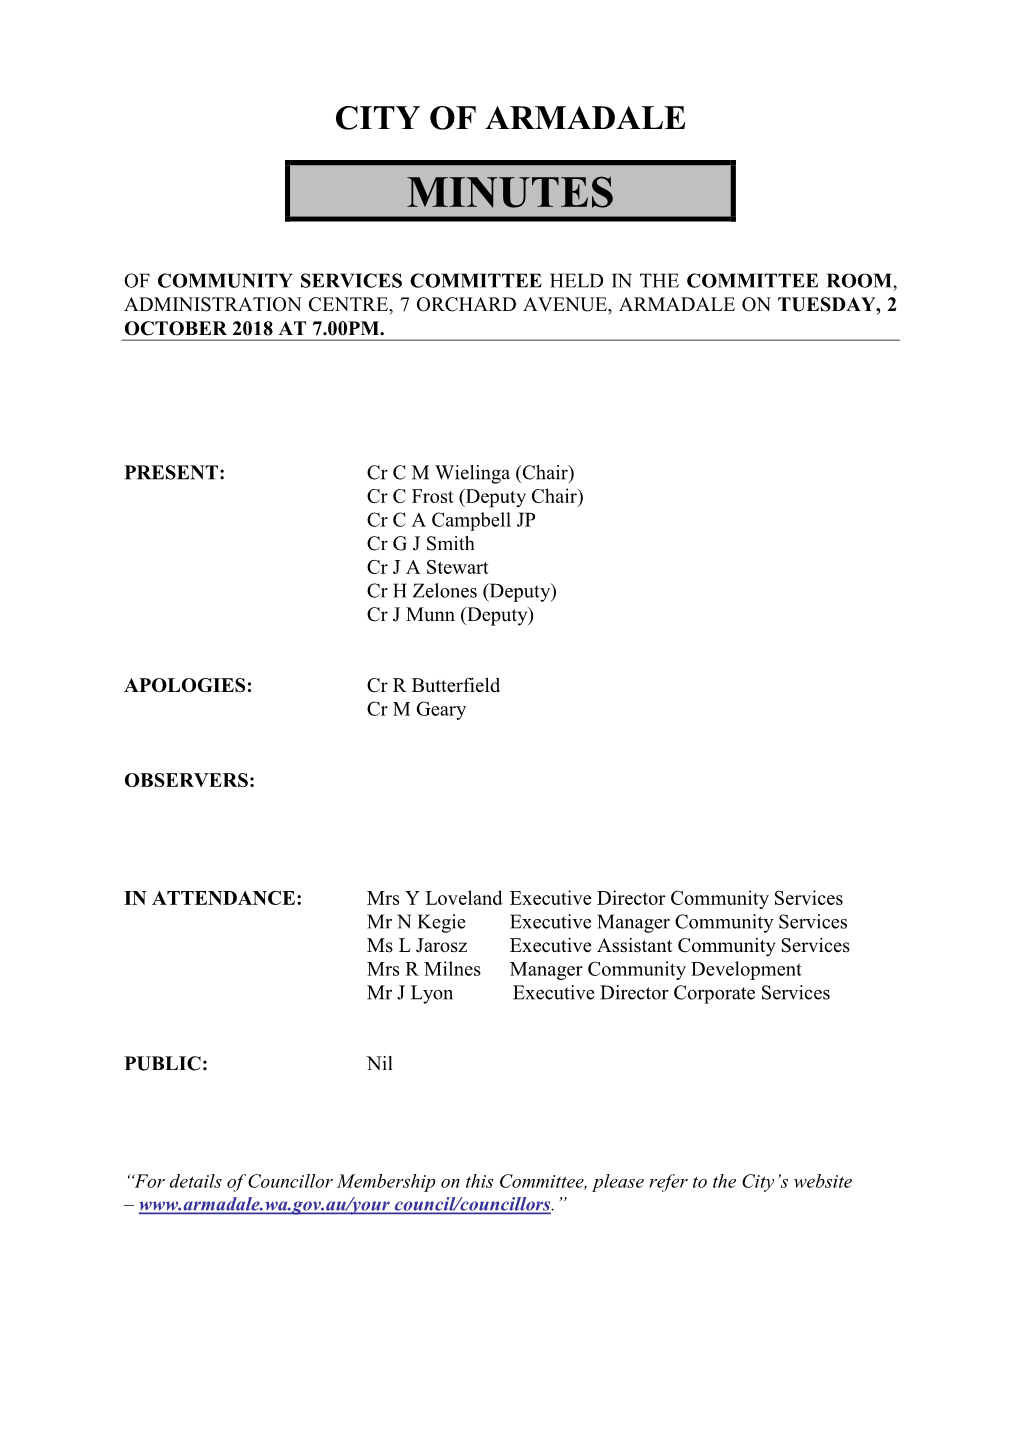 Minutes of Community Services Committee Meeting